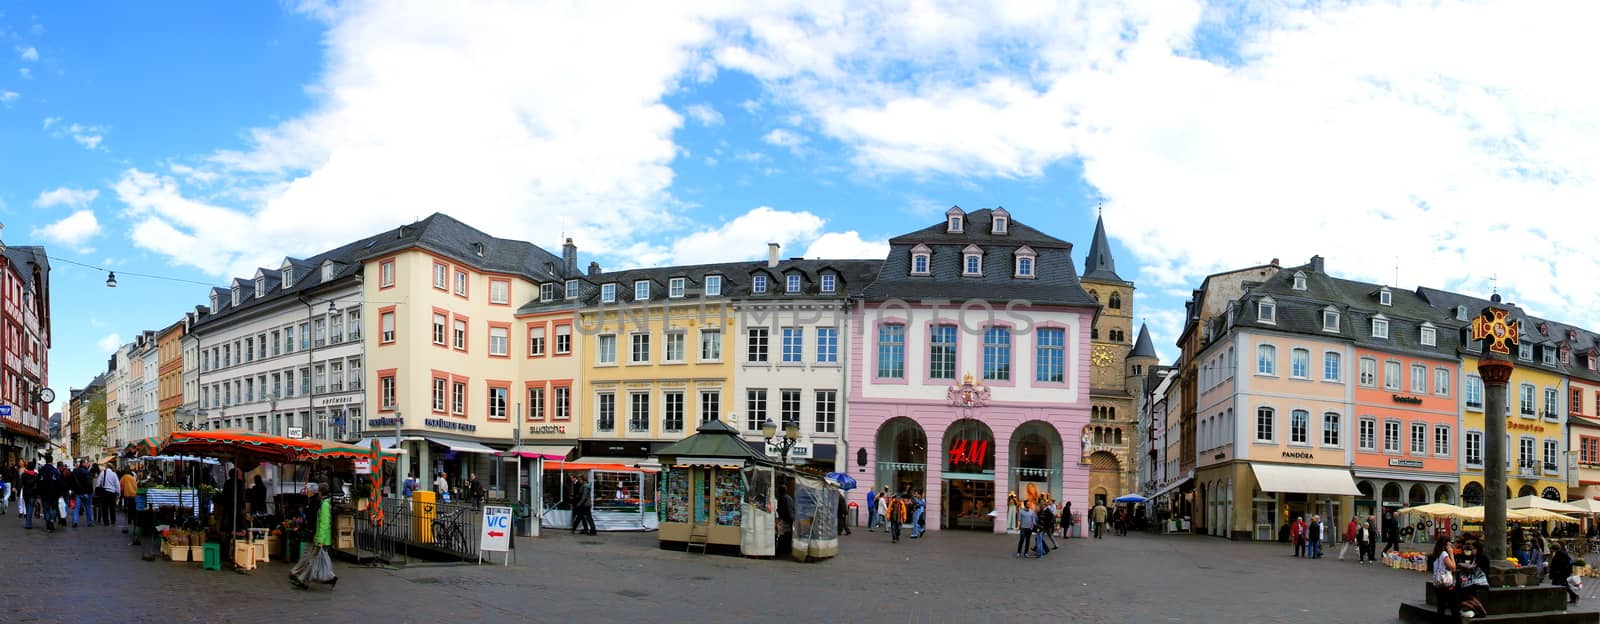 Trier main market panorama with cathedral